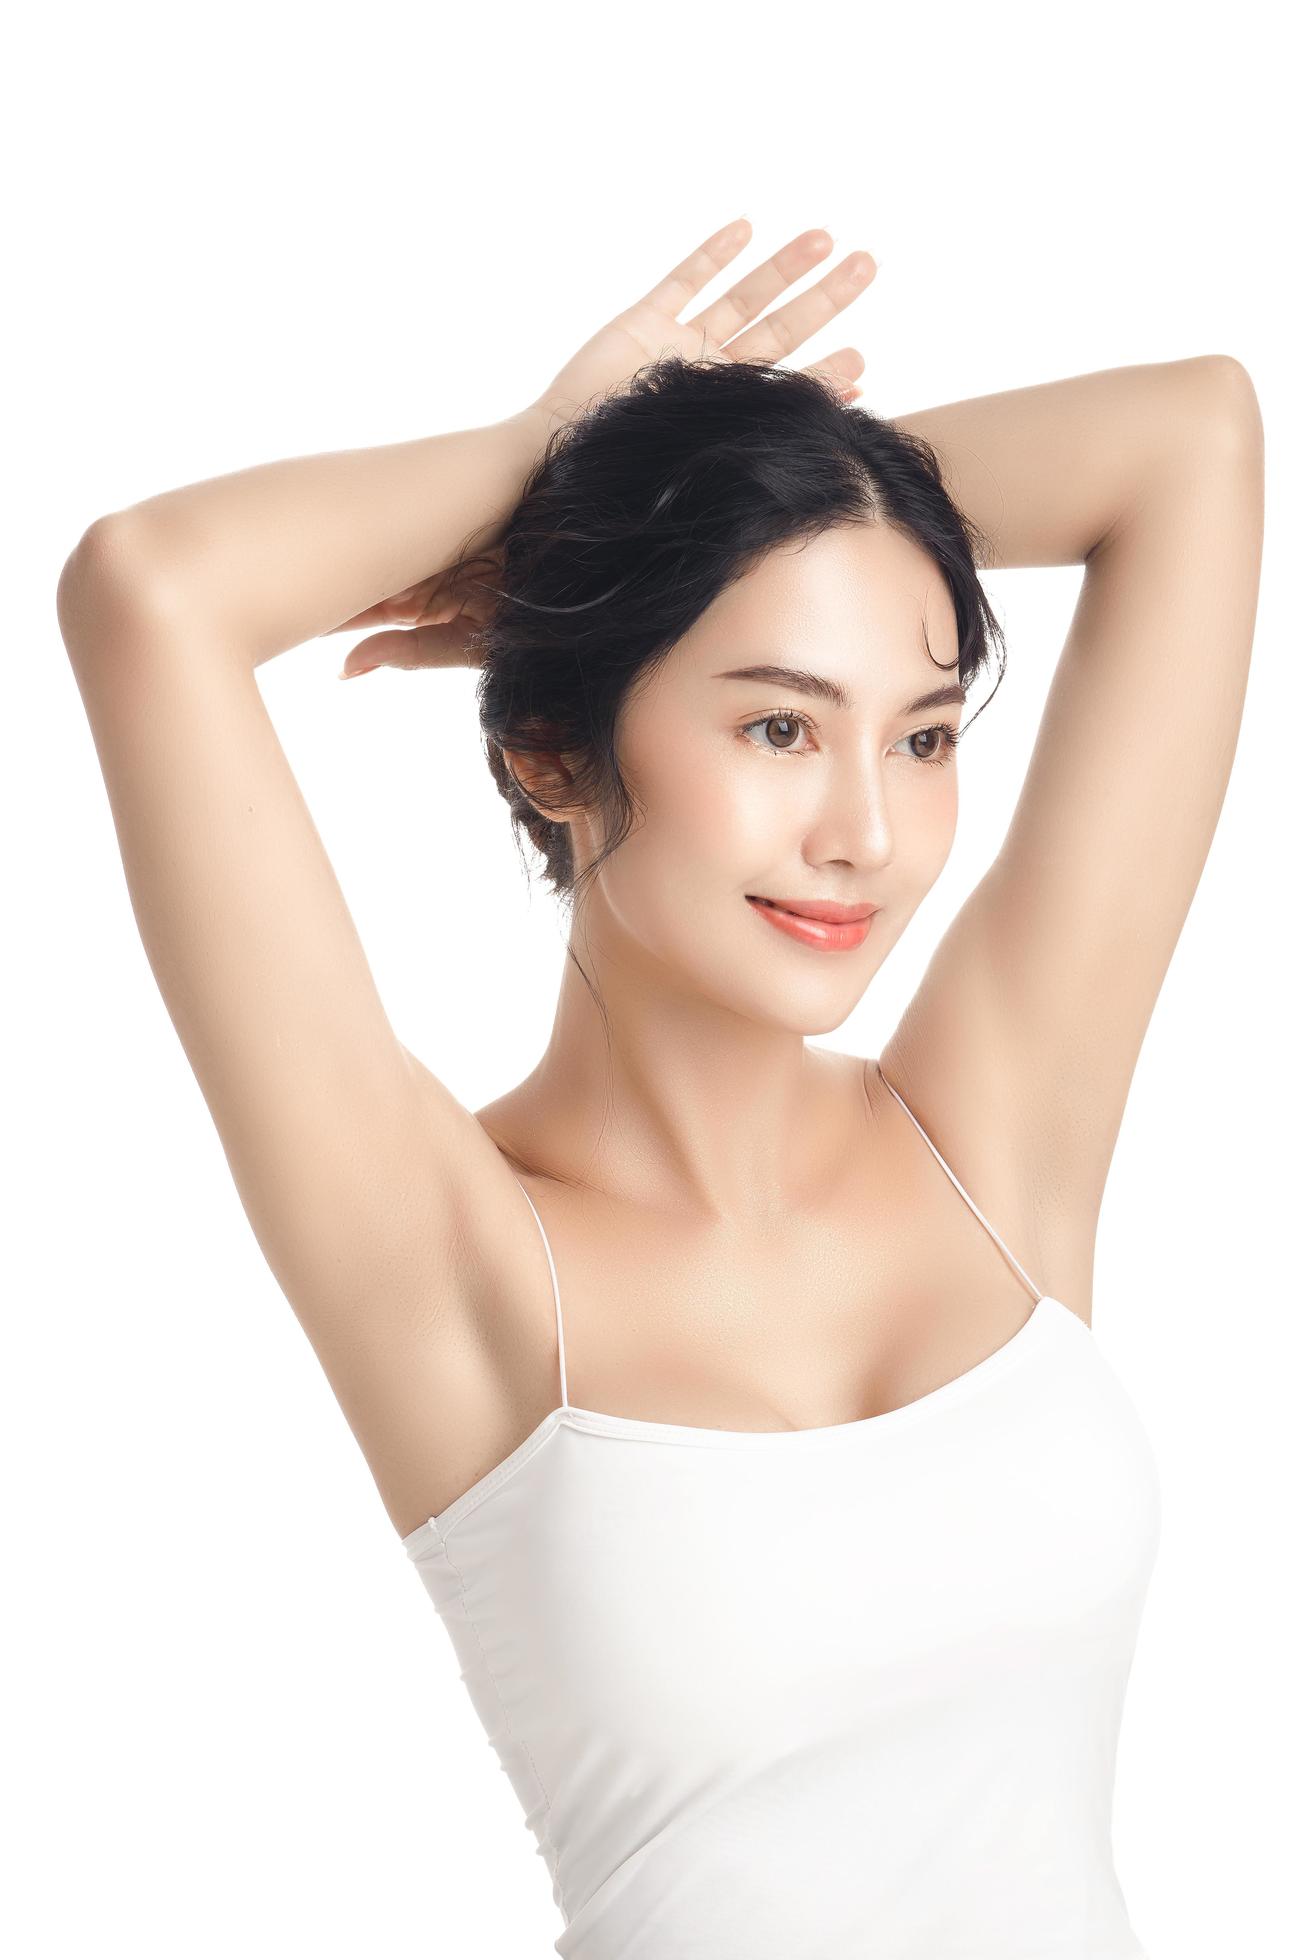 https://static.vecteezy.com/system/resources/previews/011/910/975/large_2x/asian-woman-with-a-beautiful-face-and-perfect-clean-fresh-skin-cute-female-model-rising-arm-show-her-armpit-on-white-isolated-background-facial-treatment-cosmetology-beauty-concept-free-photo.jpg